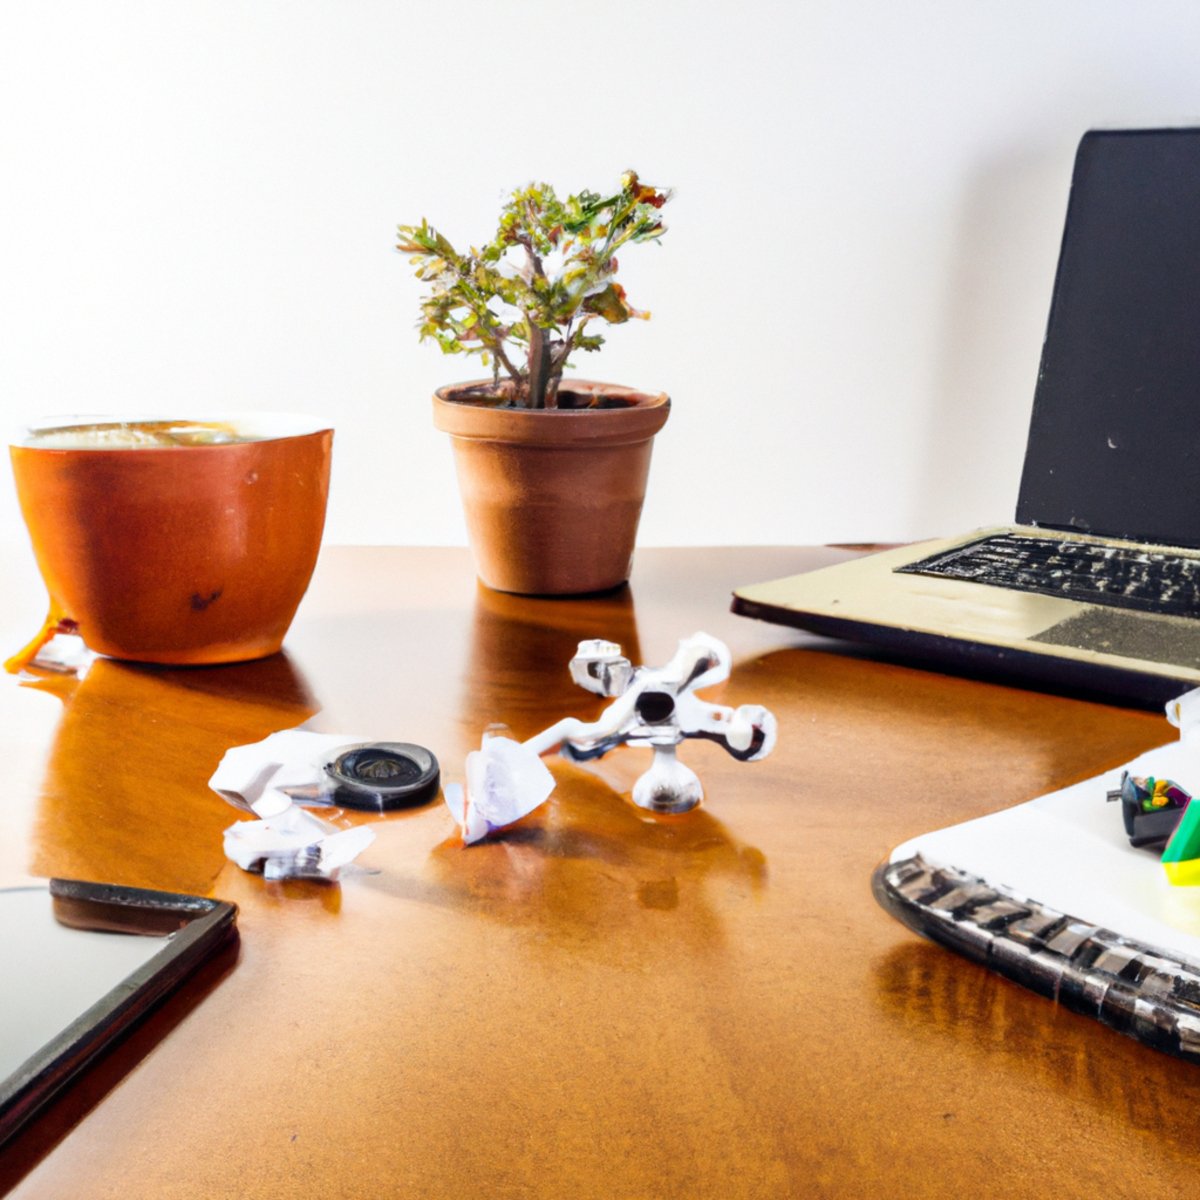 Cluttered desk with coffee mug, papers, laptop, phone, stress ball, fidget spinner, and plant. Soft lamp illuminates busy workload and stress relief.